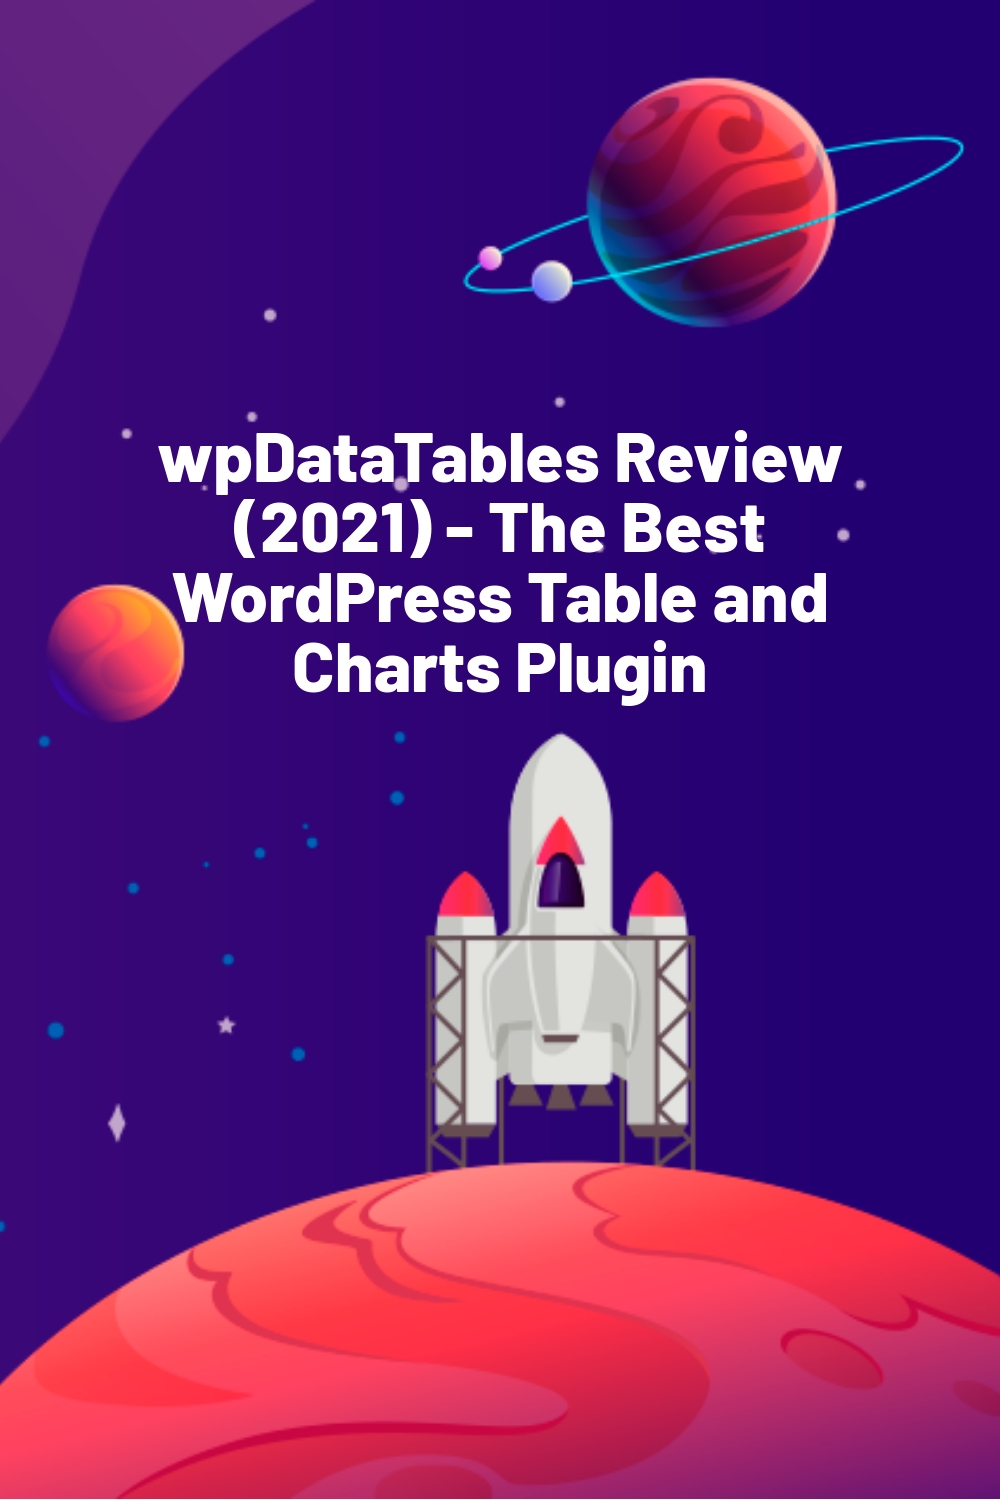 wpDataTables Review (2021) – The Best WordPress Table and Charts Plugin